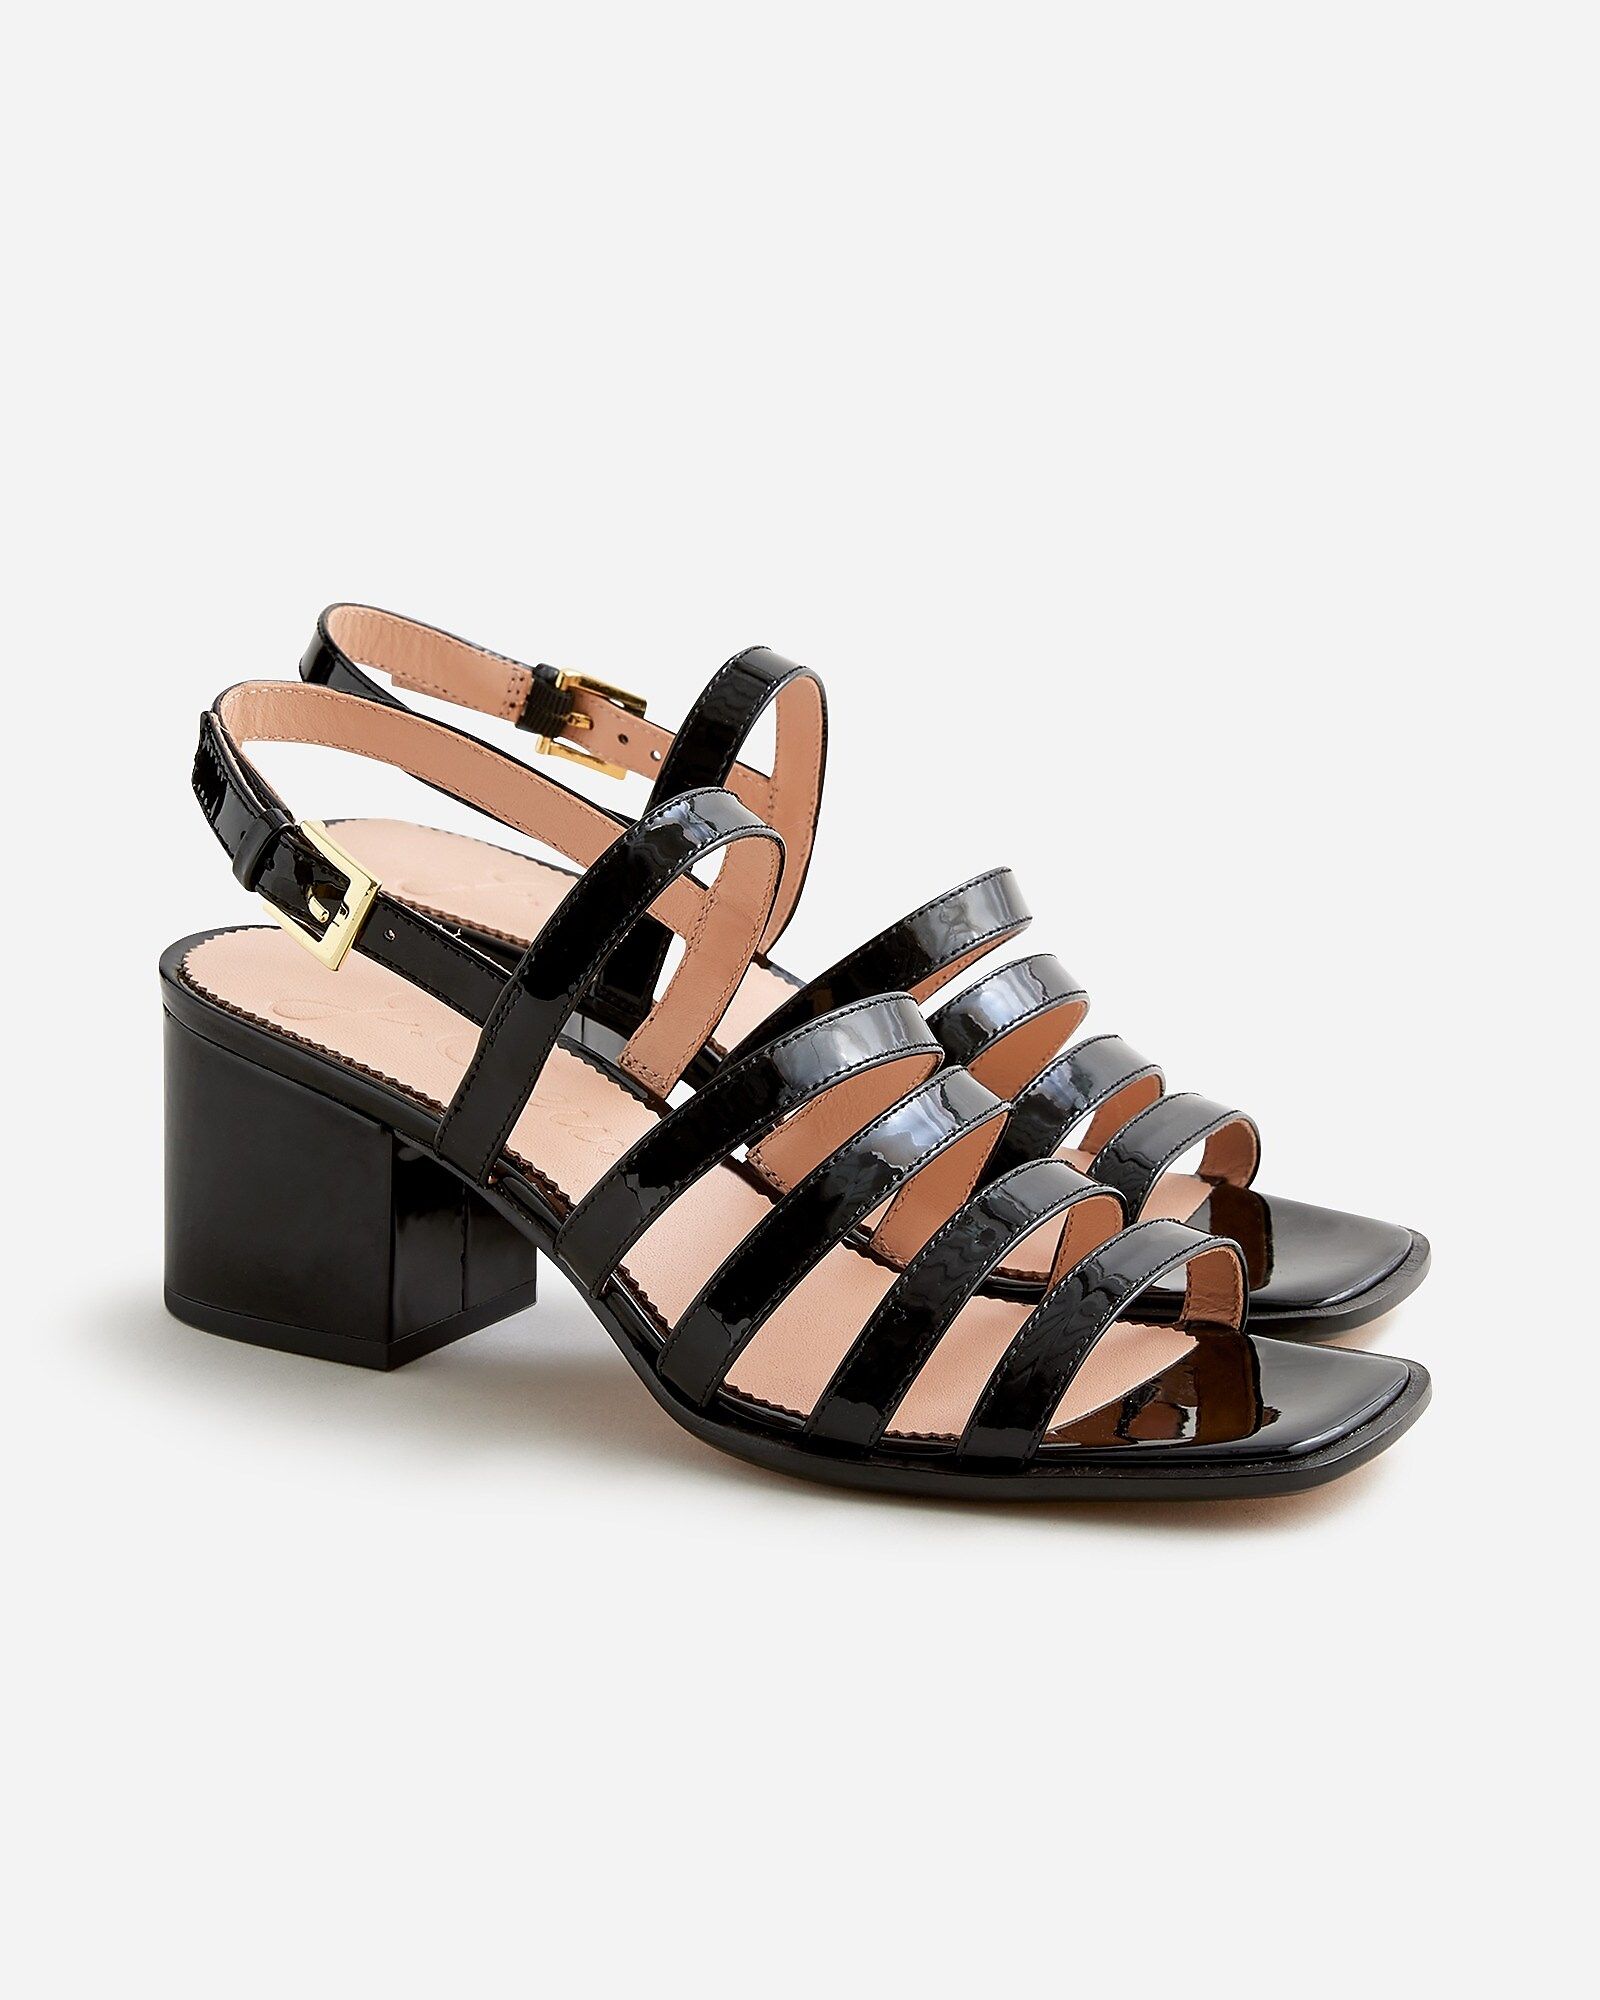 Dylan strappy block-heel sandals in patent leather | J.Crew US